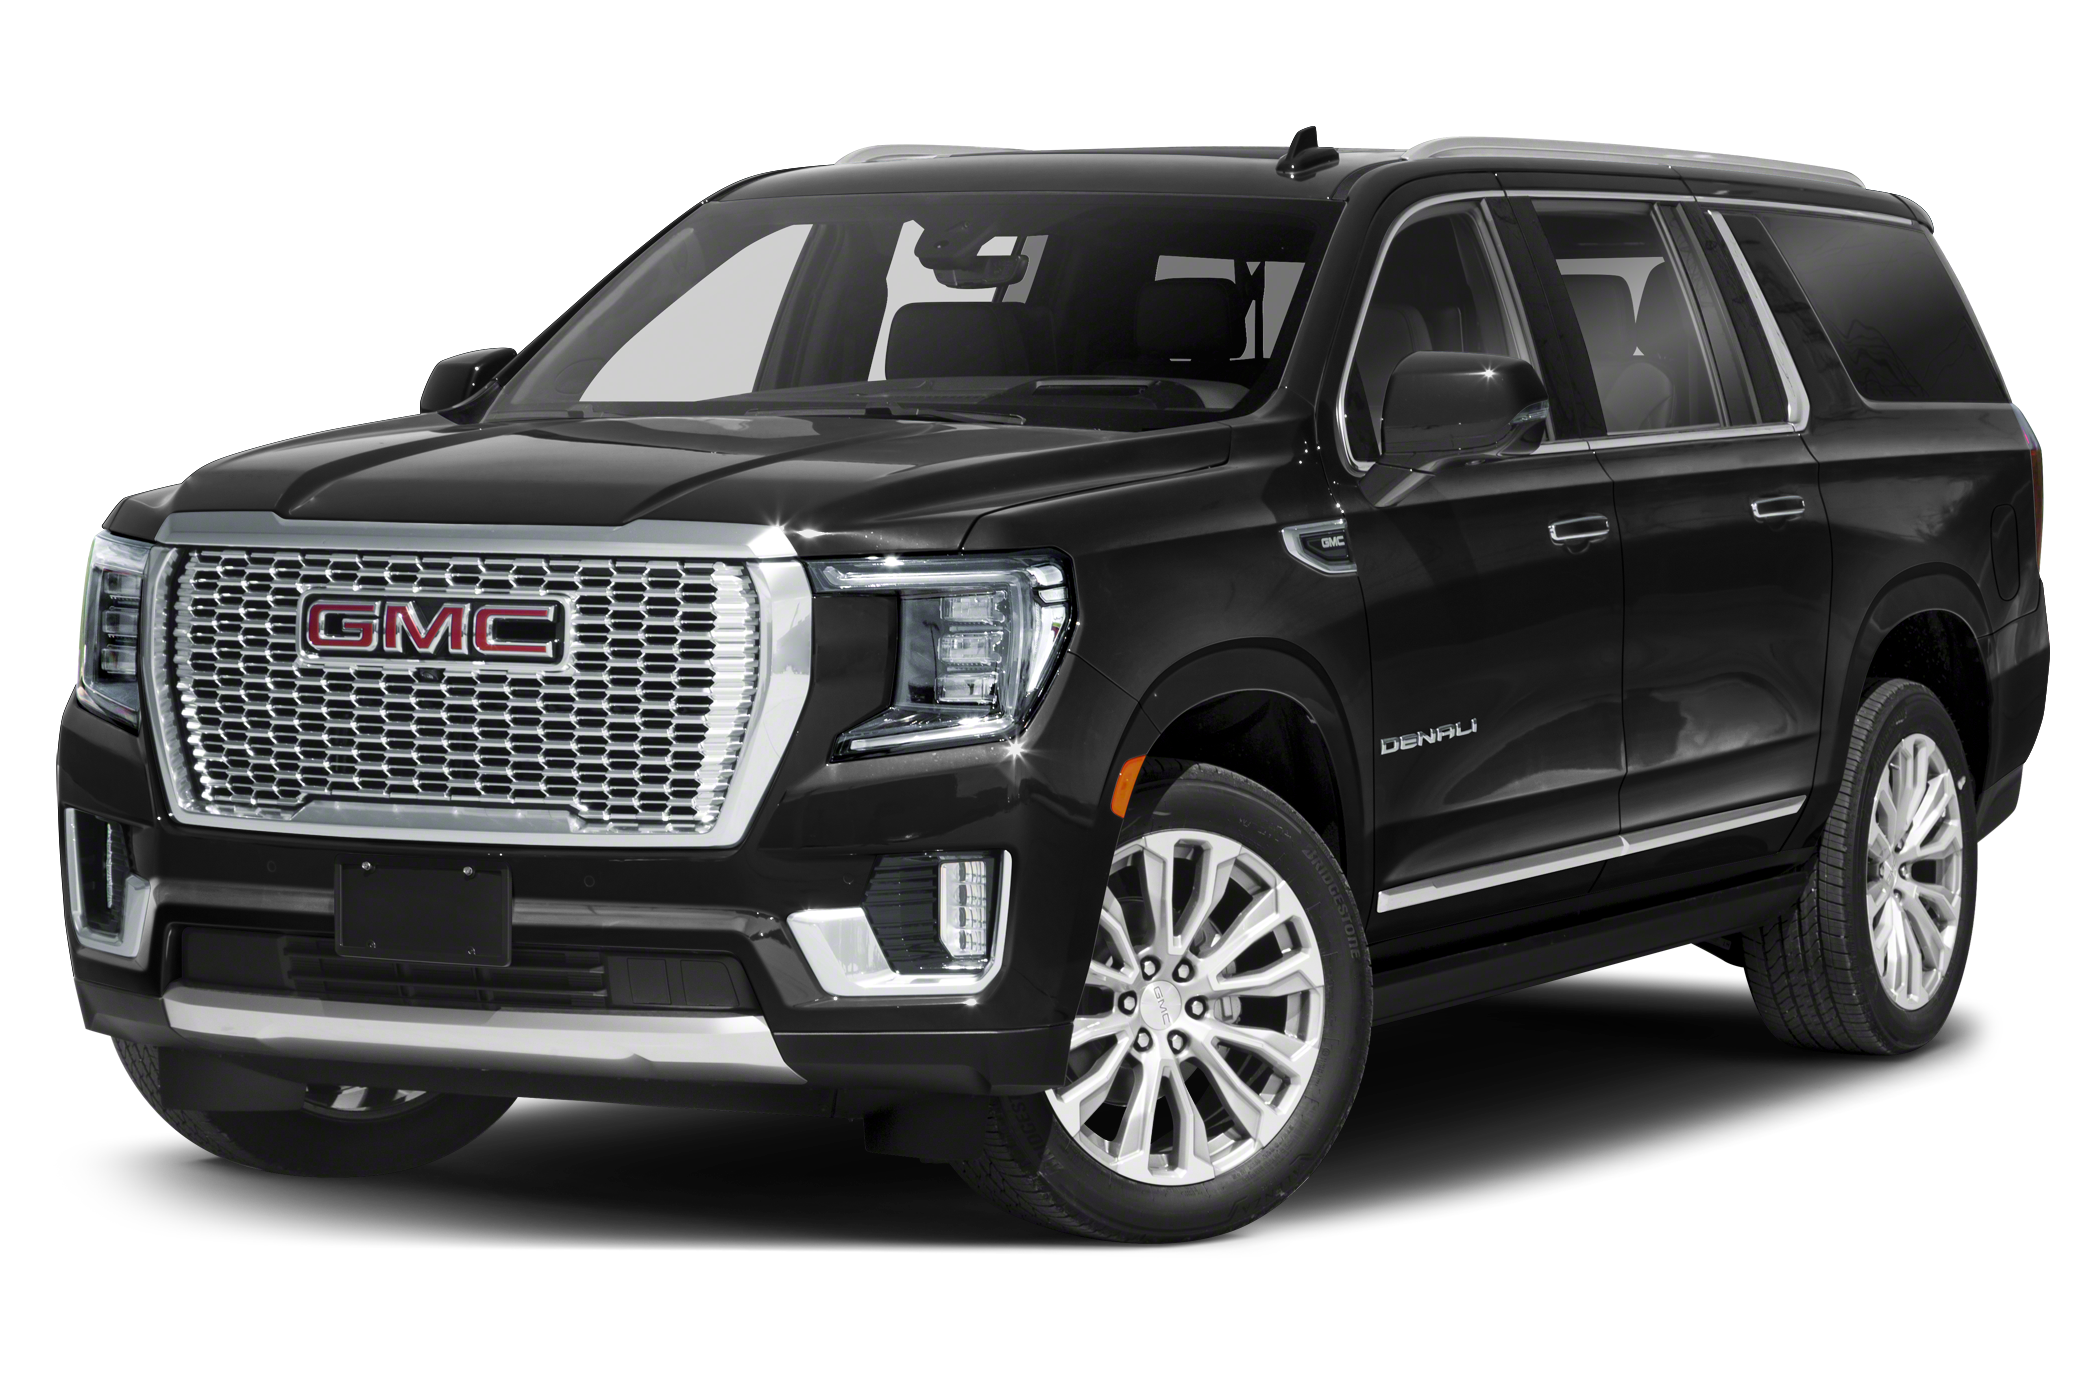 2021 Gmc Yukon Xl Pictures Price And Release Date Cars Review 2021